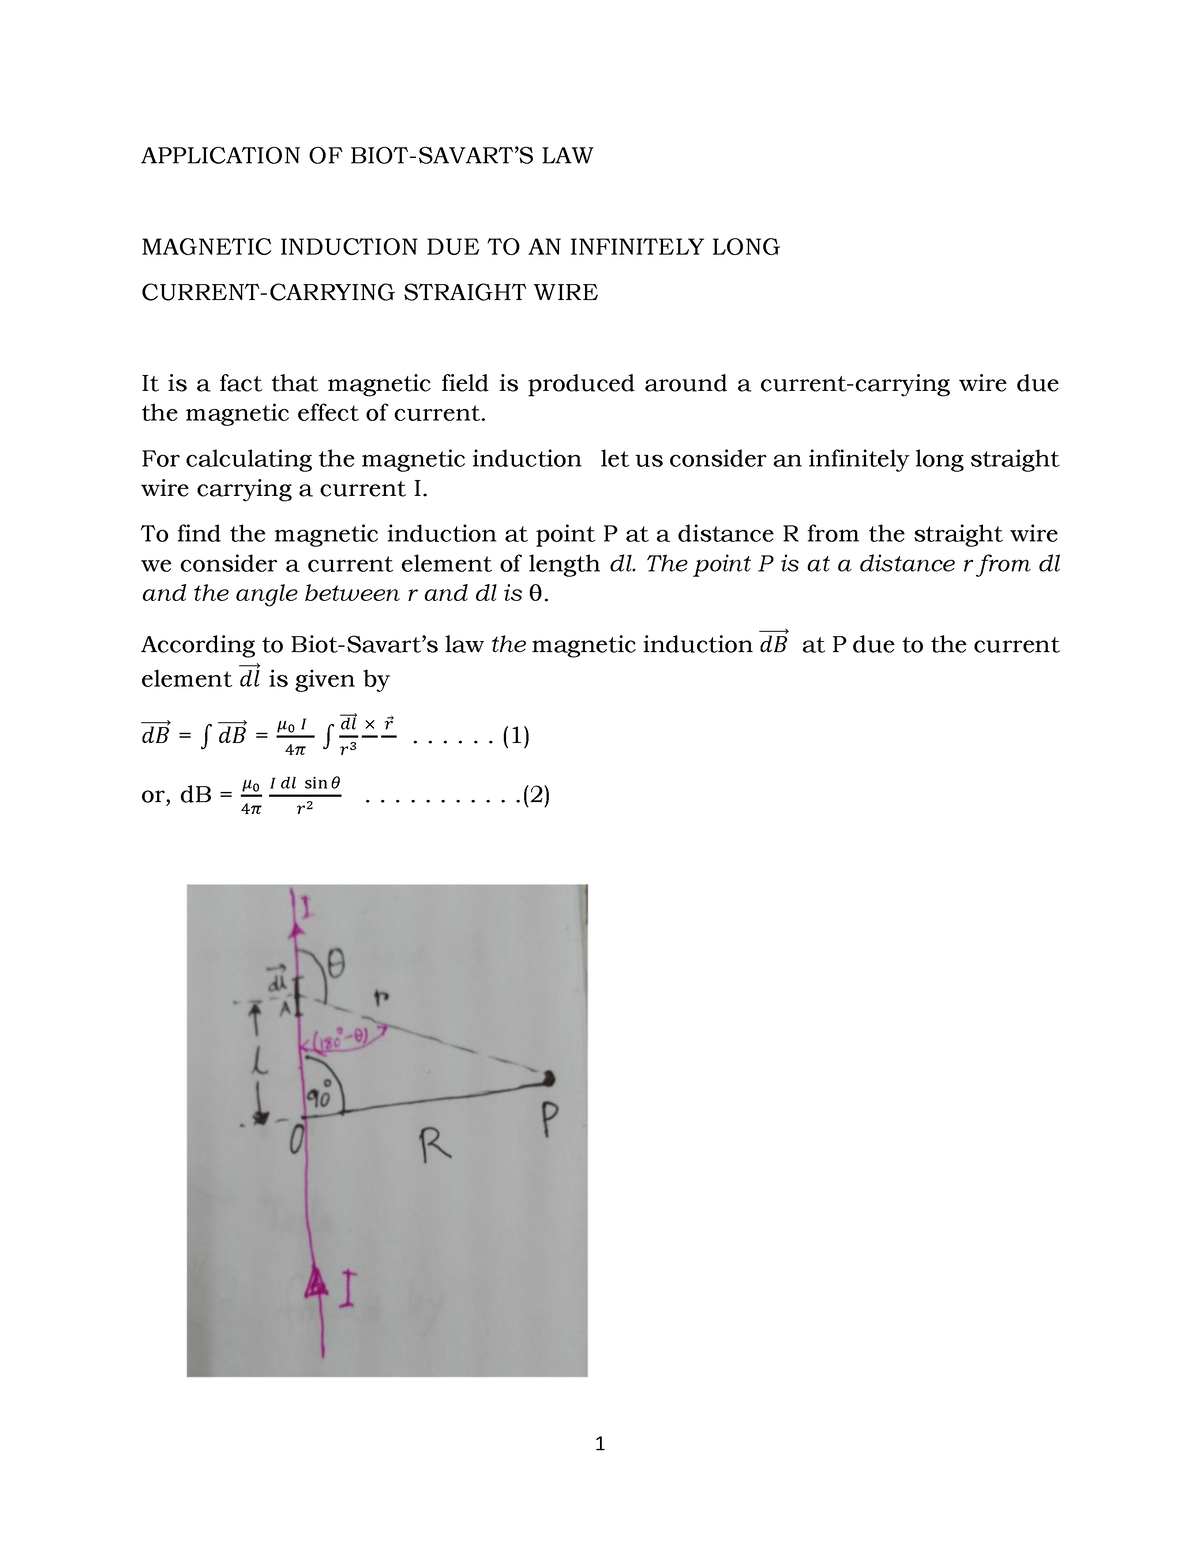 Biot Savart Law Application Lecture 1 Application Of Biot Savarts Law Magnetic Induction 